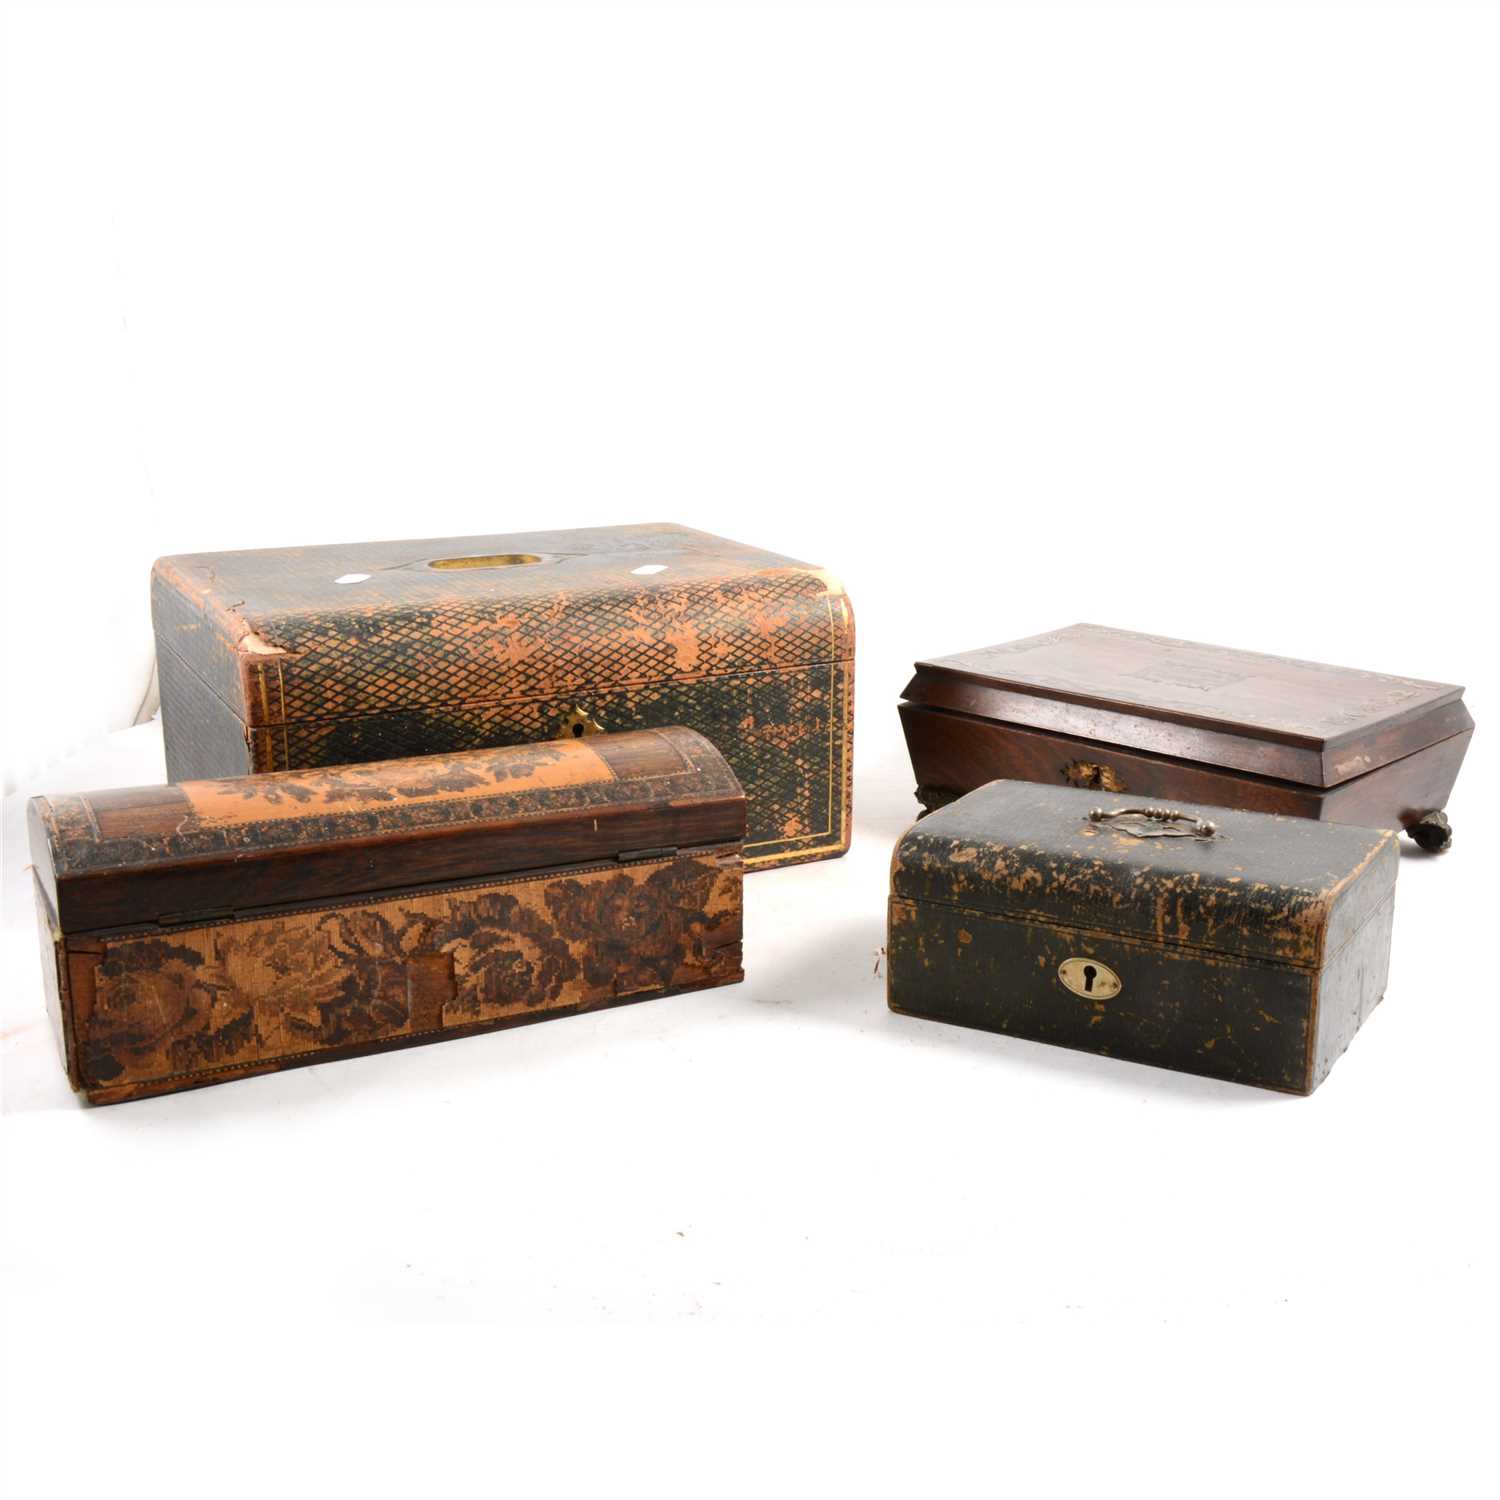 Lot 137 - A dome-topped Tunbridge ware glove box (AF), Victorian rosewood and brass casket, and two leather jewellery cases